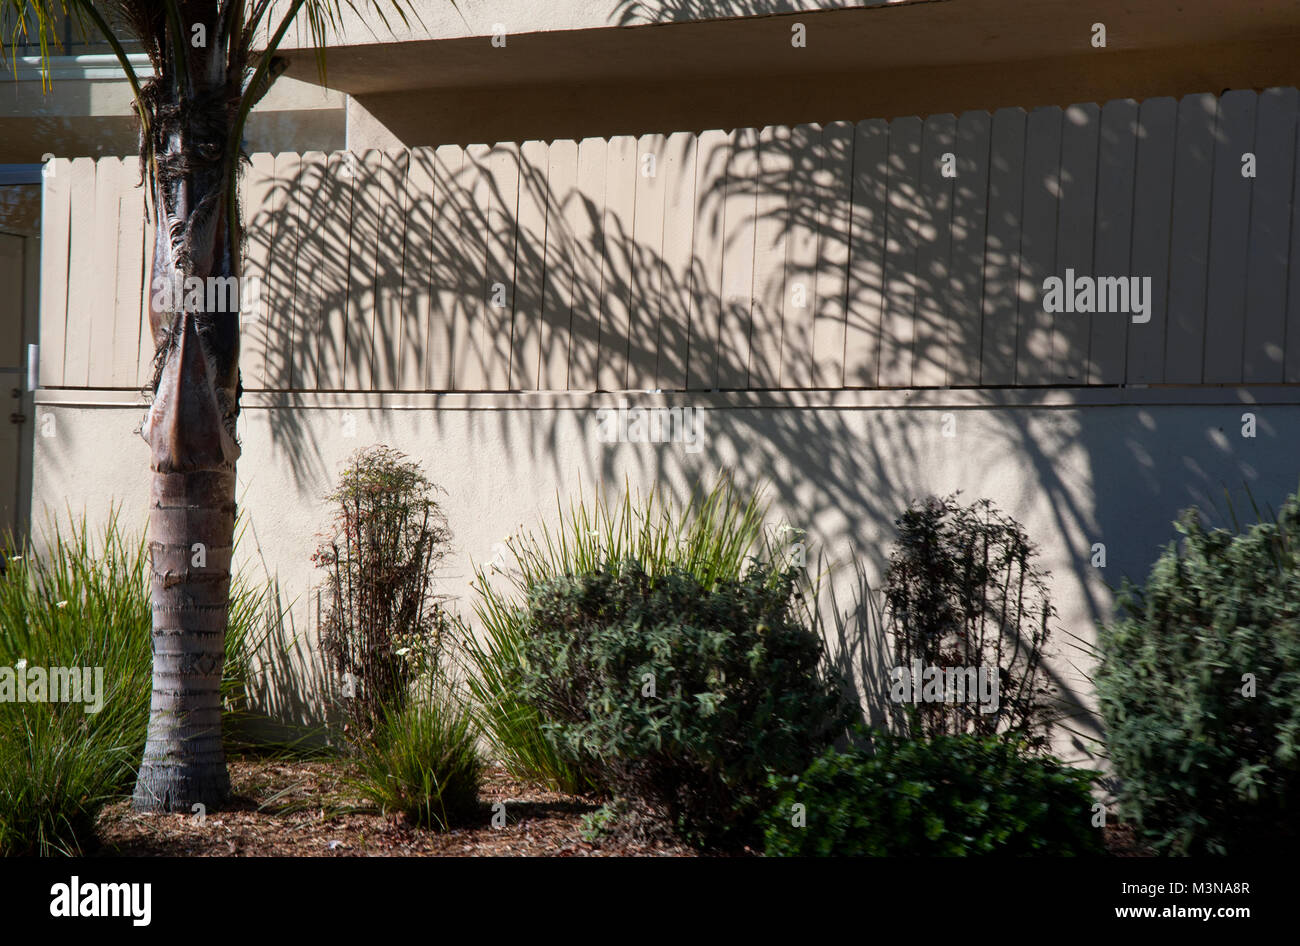 Landscaping at apartment building on Washington Blvd. in Los Angeles, CA Stock Photo